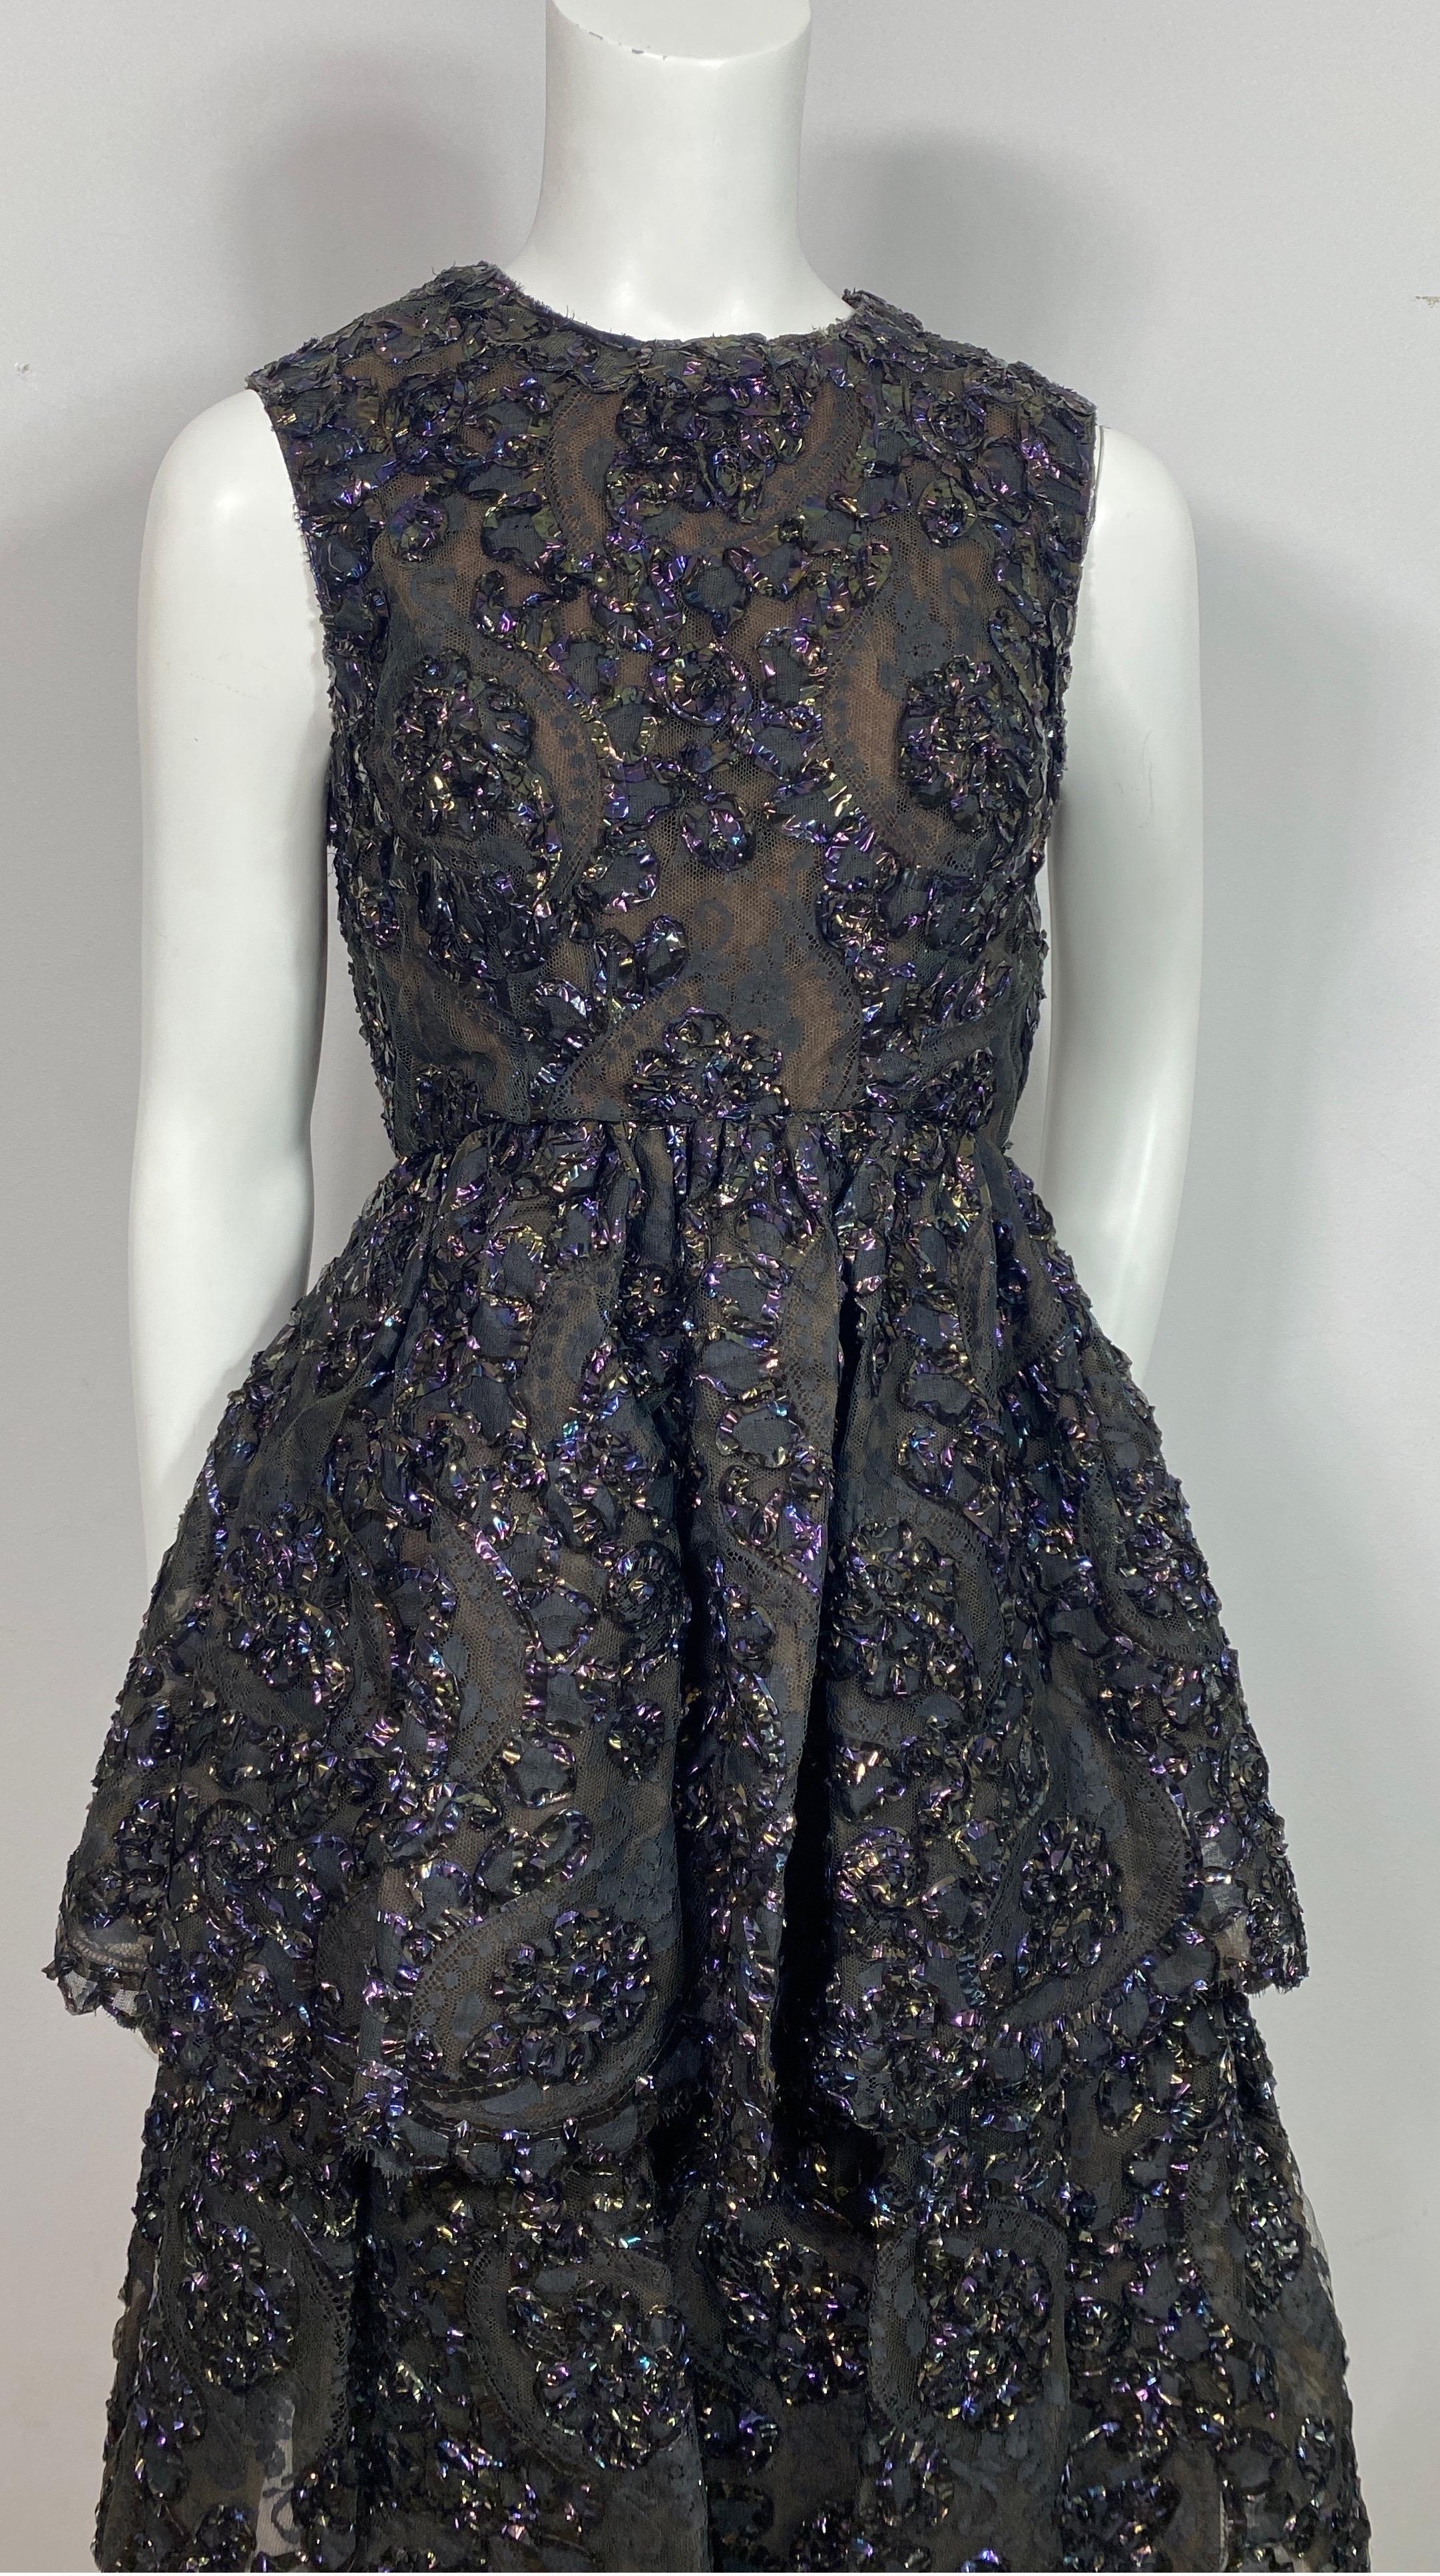 Sarmi 1960's Cellophane Encrusted Black Lace Sleeveless Cocktail Dress-Size 4 In Excellent Condition For Sale In West Palm Beach, FL